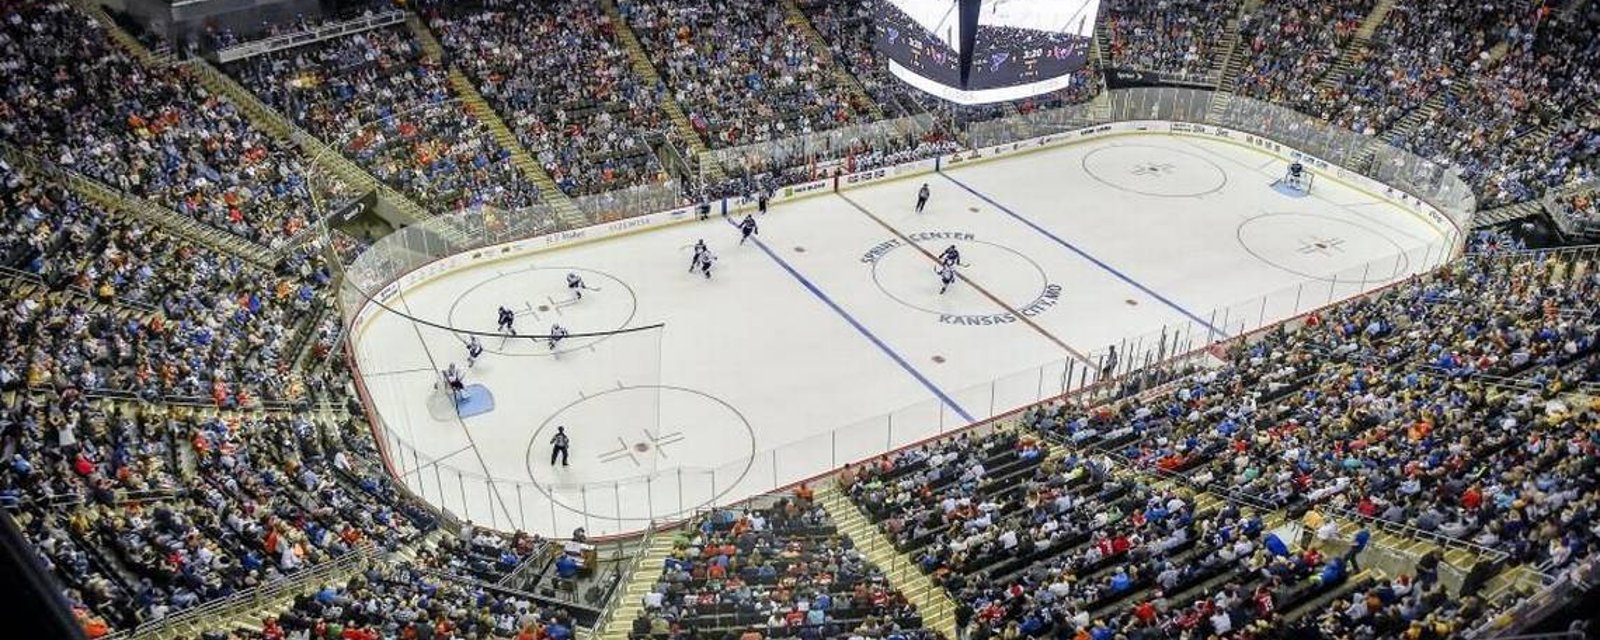 5 U.S. cities, including Kansas City, expected to reach out to the NHL to welcome Canadian teams for 2020-21 